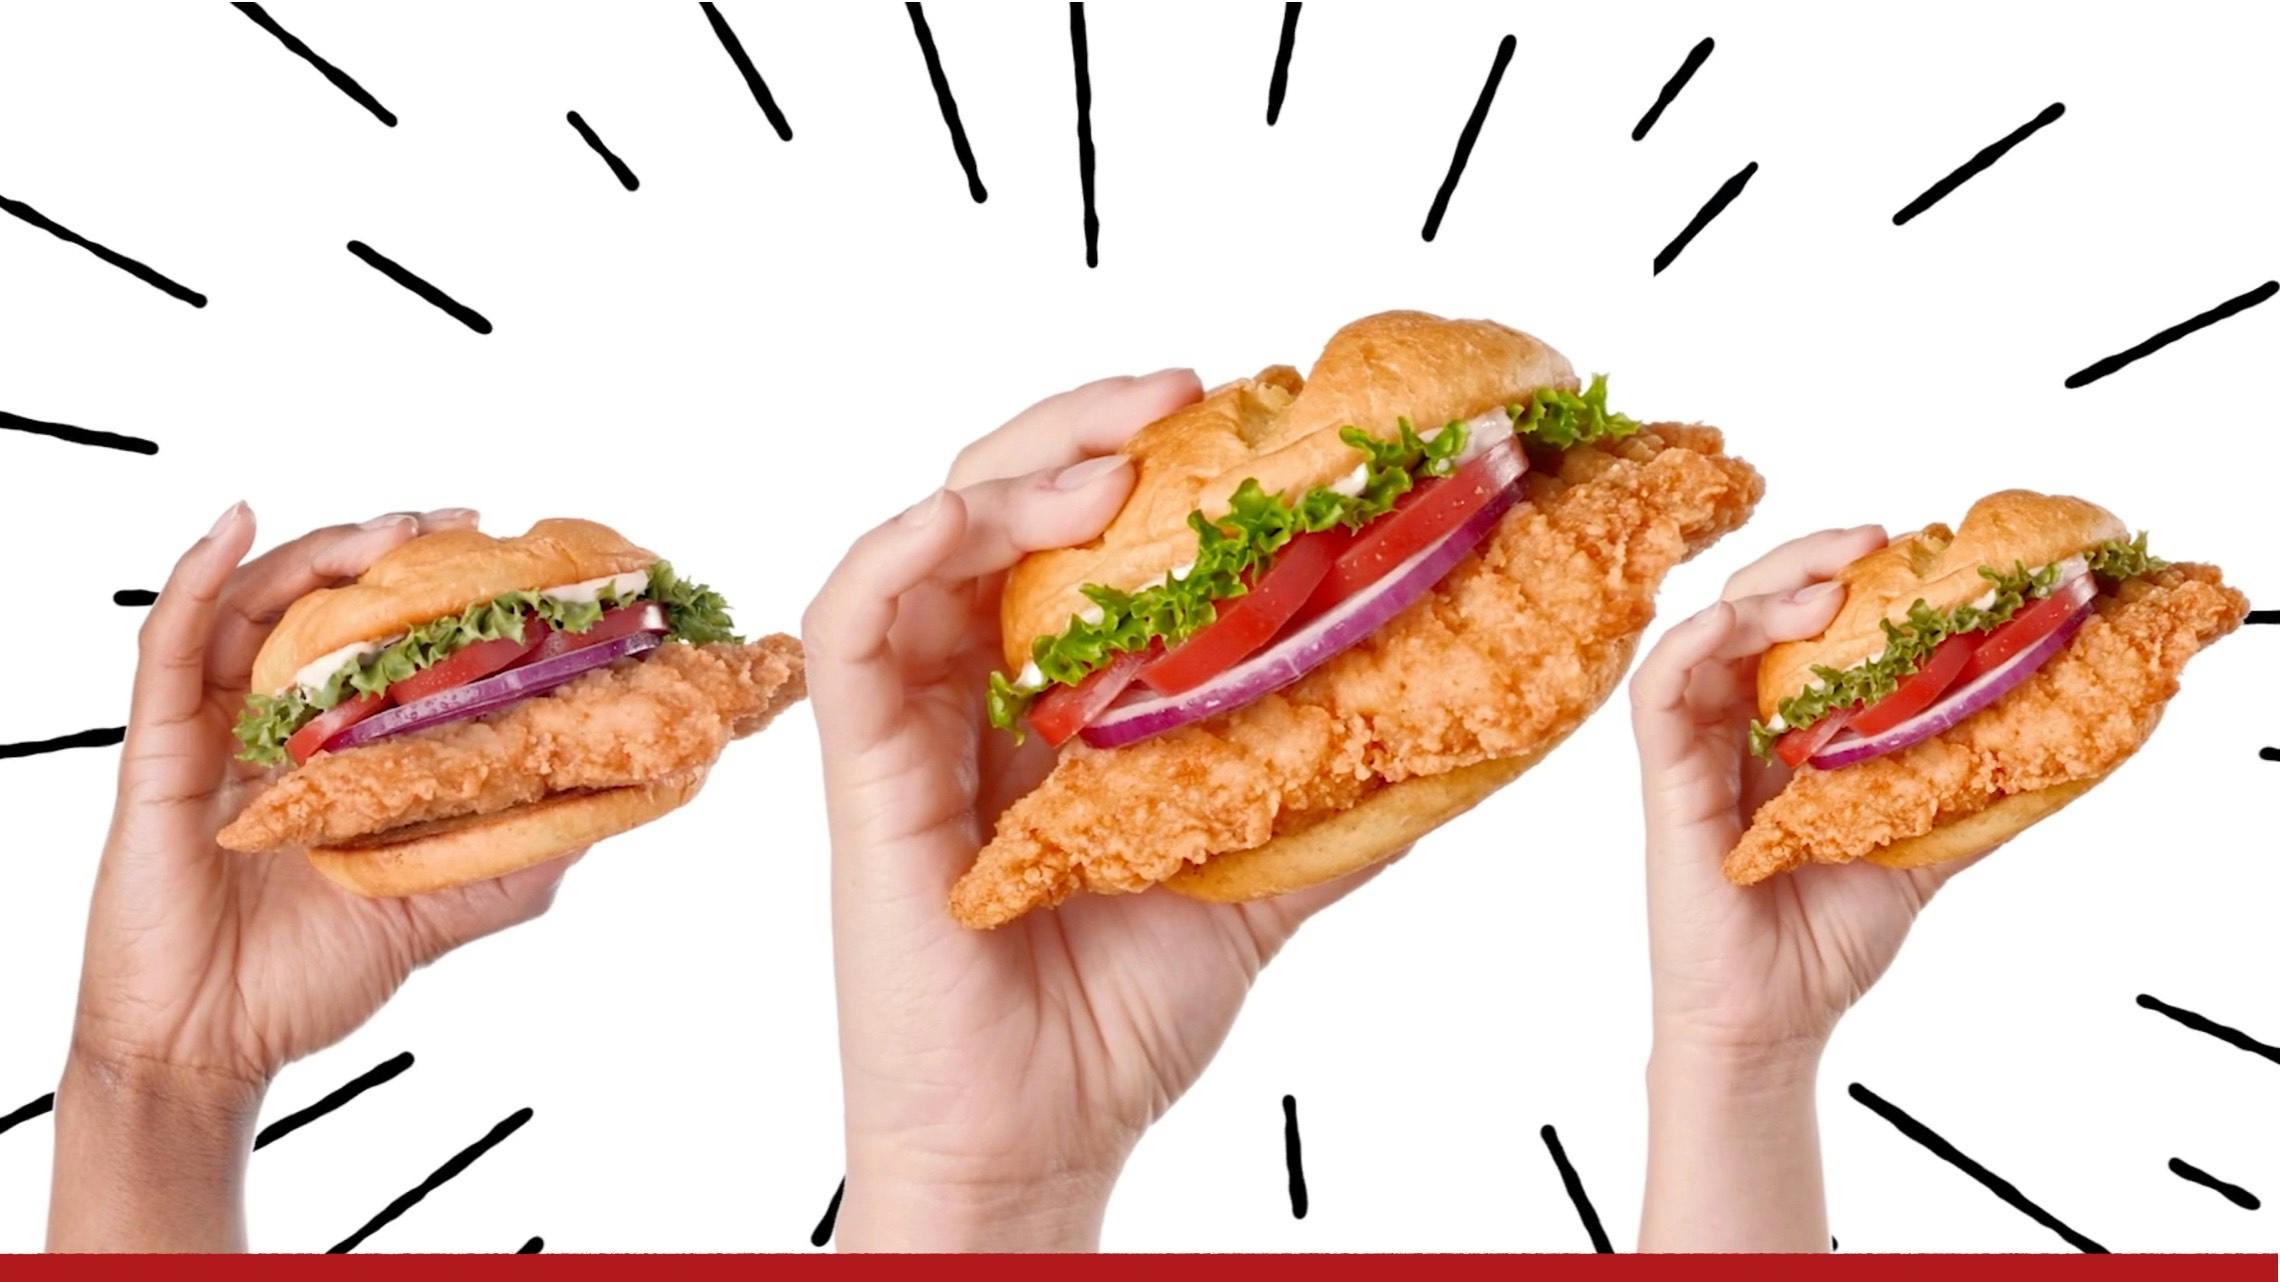 Image of three hands holding up crispy chicken sandwiches.